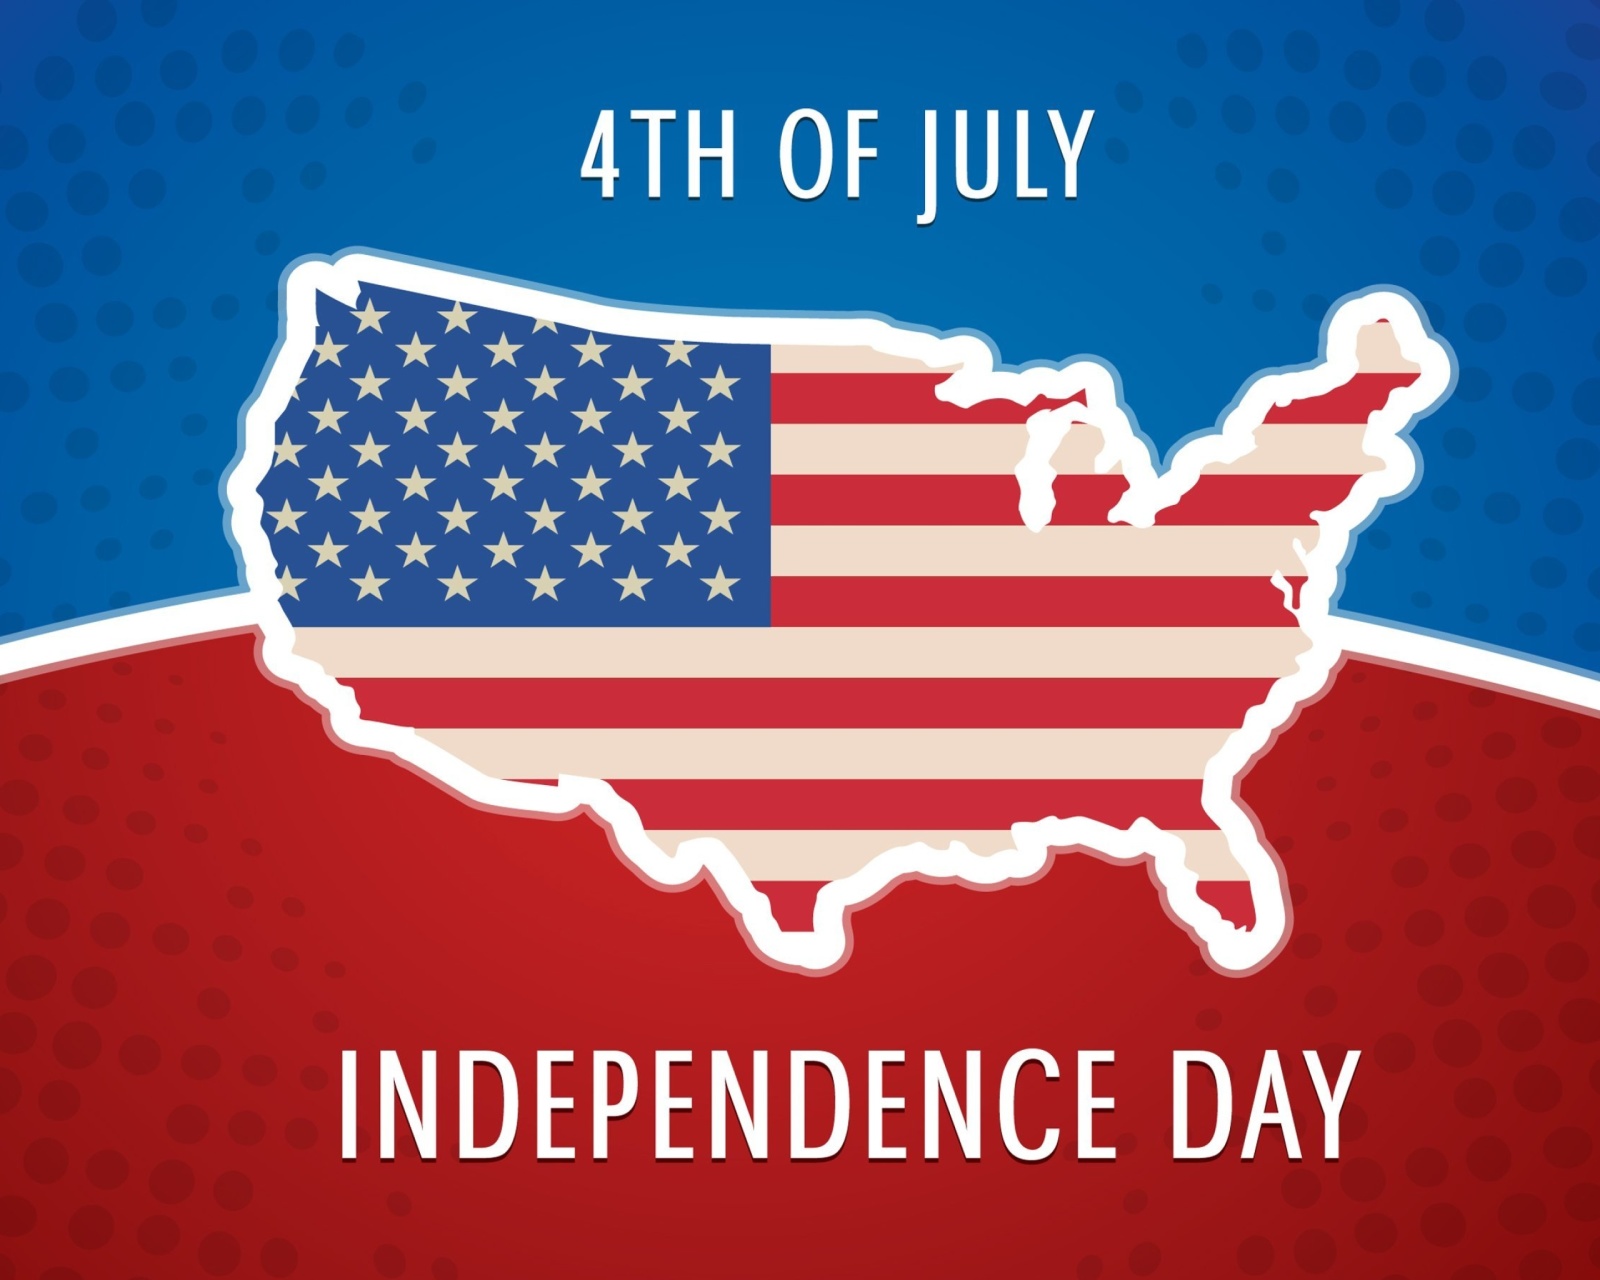 4th of July, Independence Day wallpaper 1600x1280